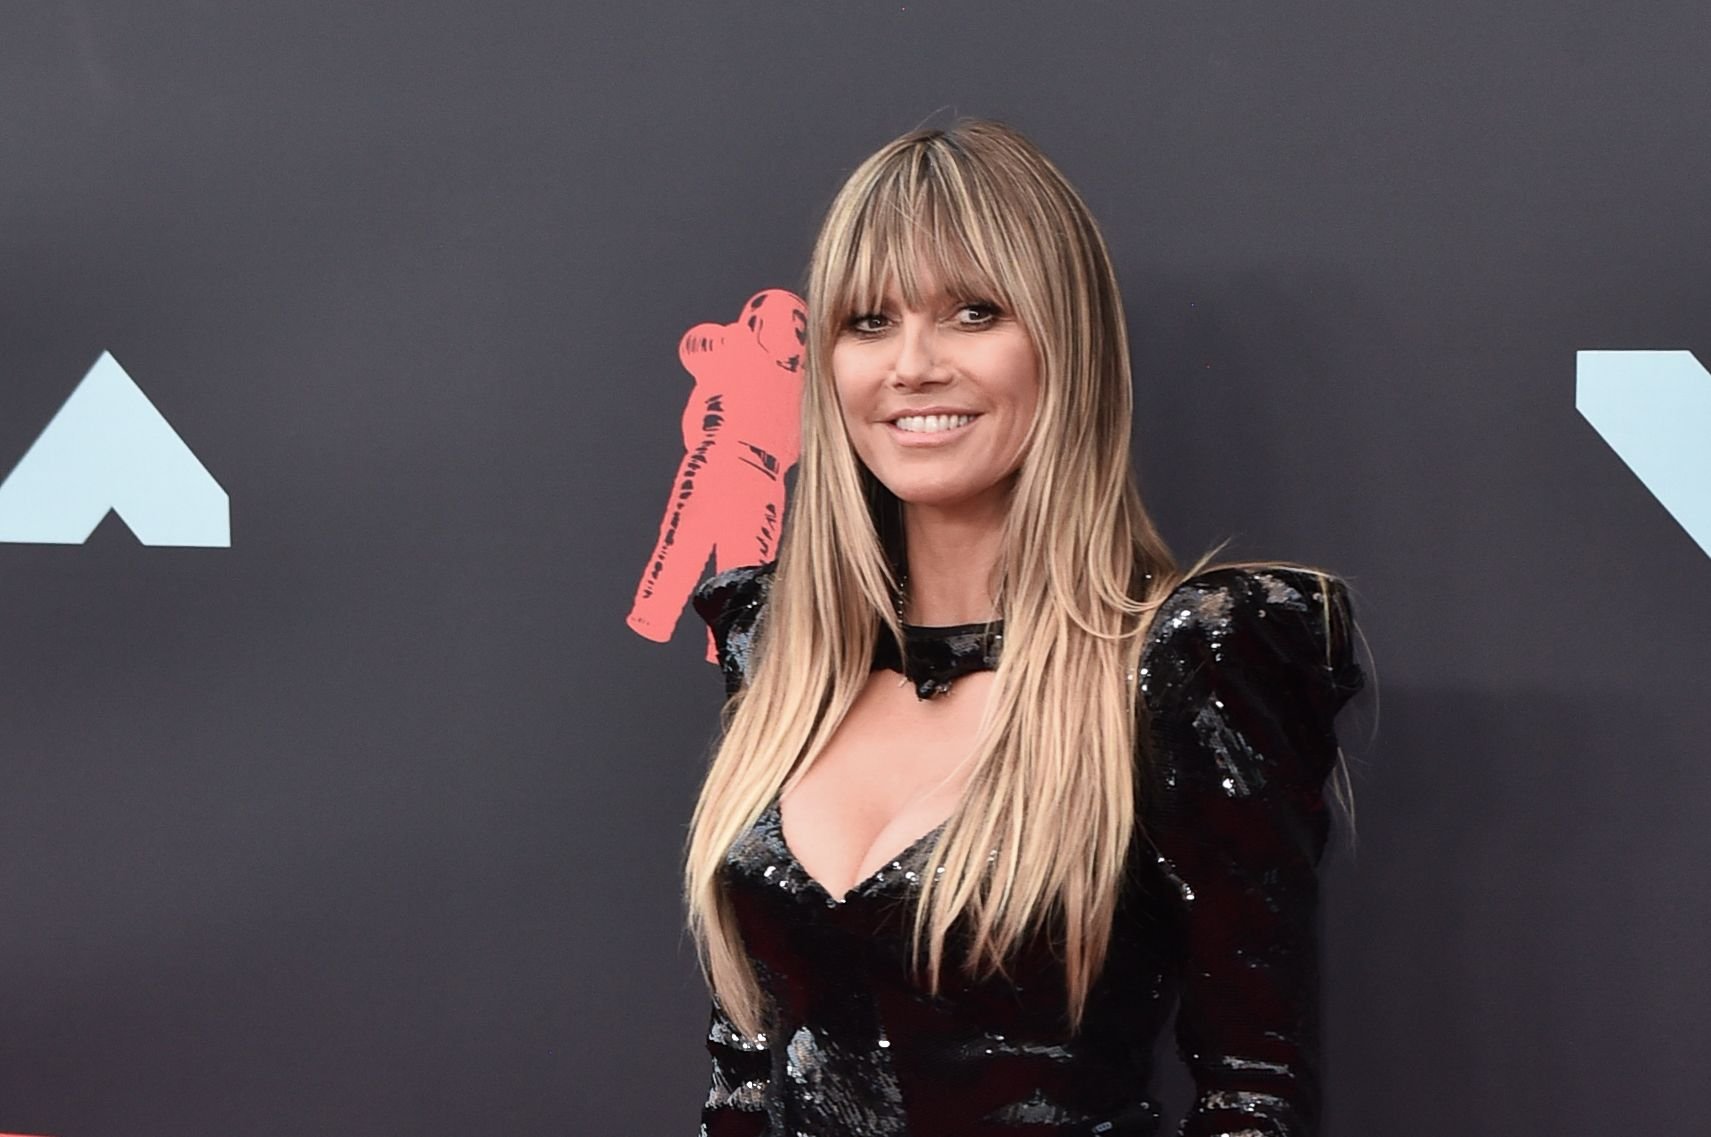 Model Heidi Klum at the 2019 MTV Video Music Awards red carpet at Prudential Center on August 26, 2019 | Photo: Getty Images